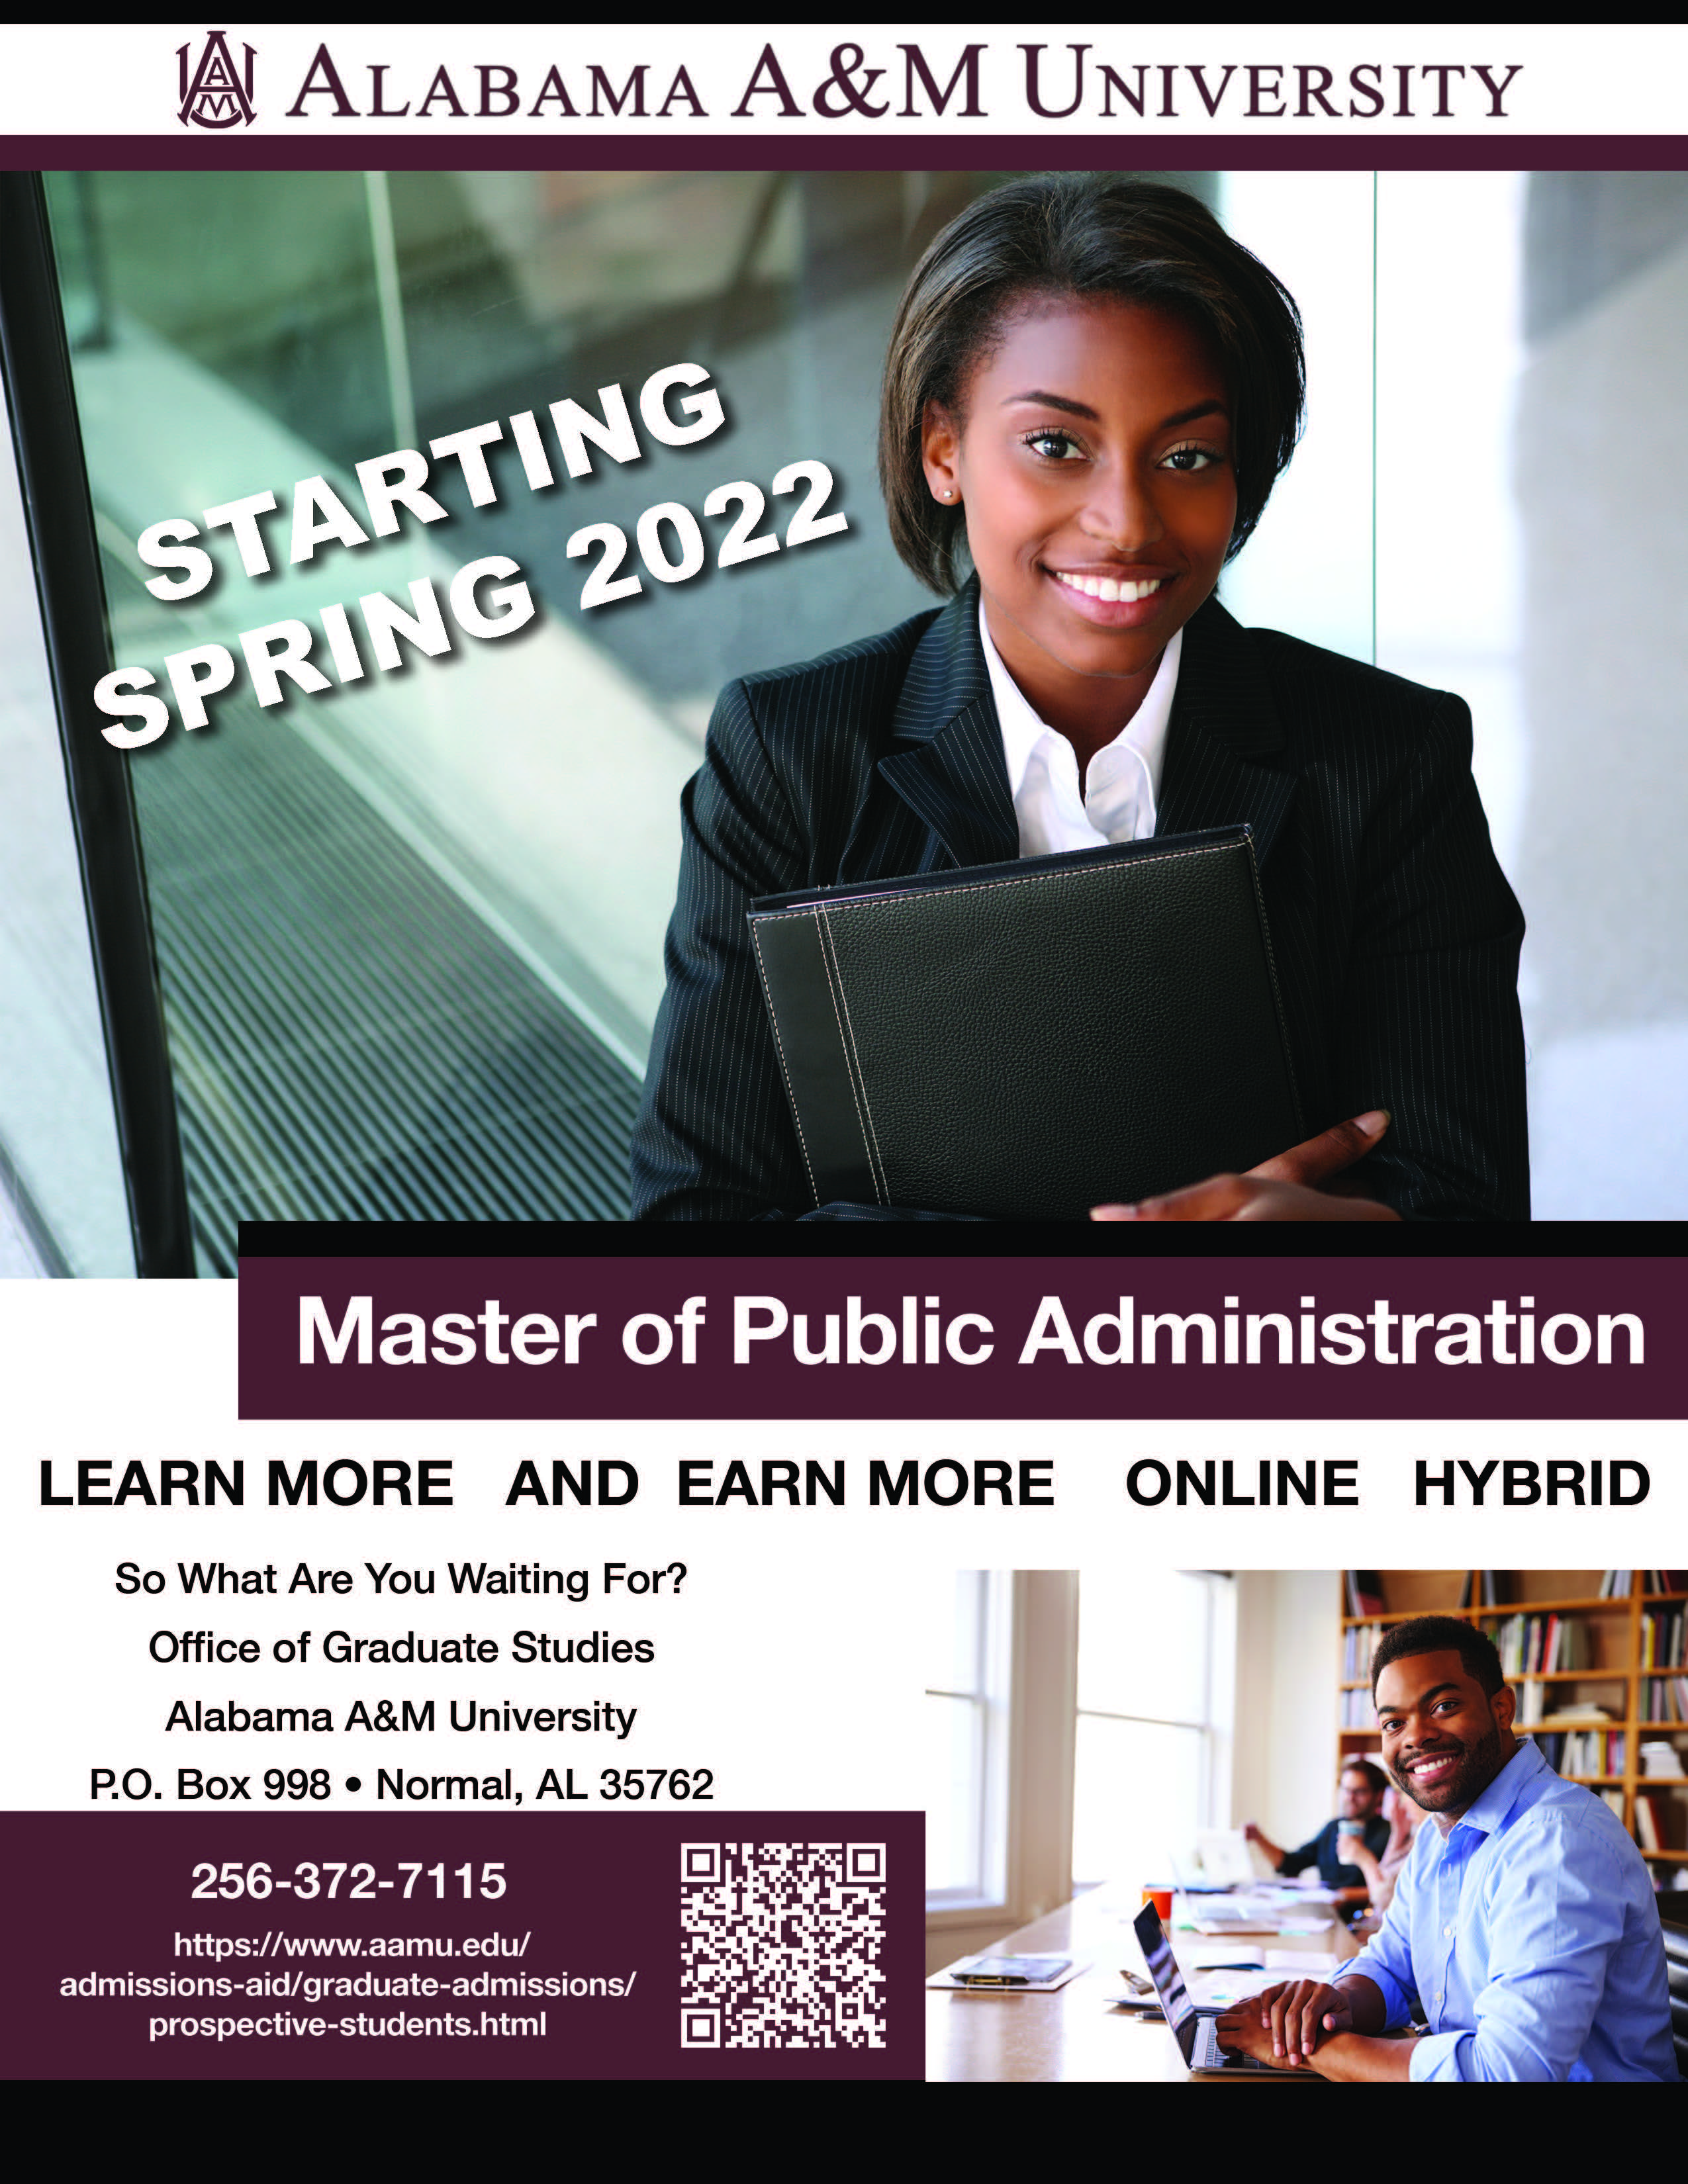 Master of Public Administration coming Spring 2022